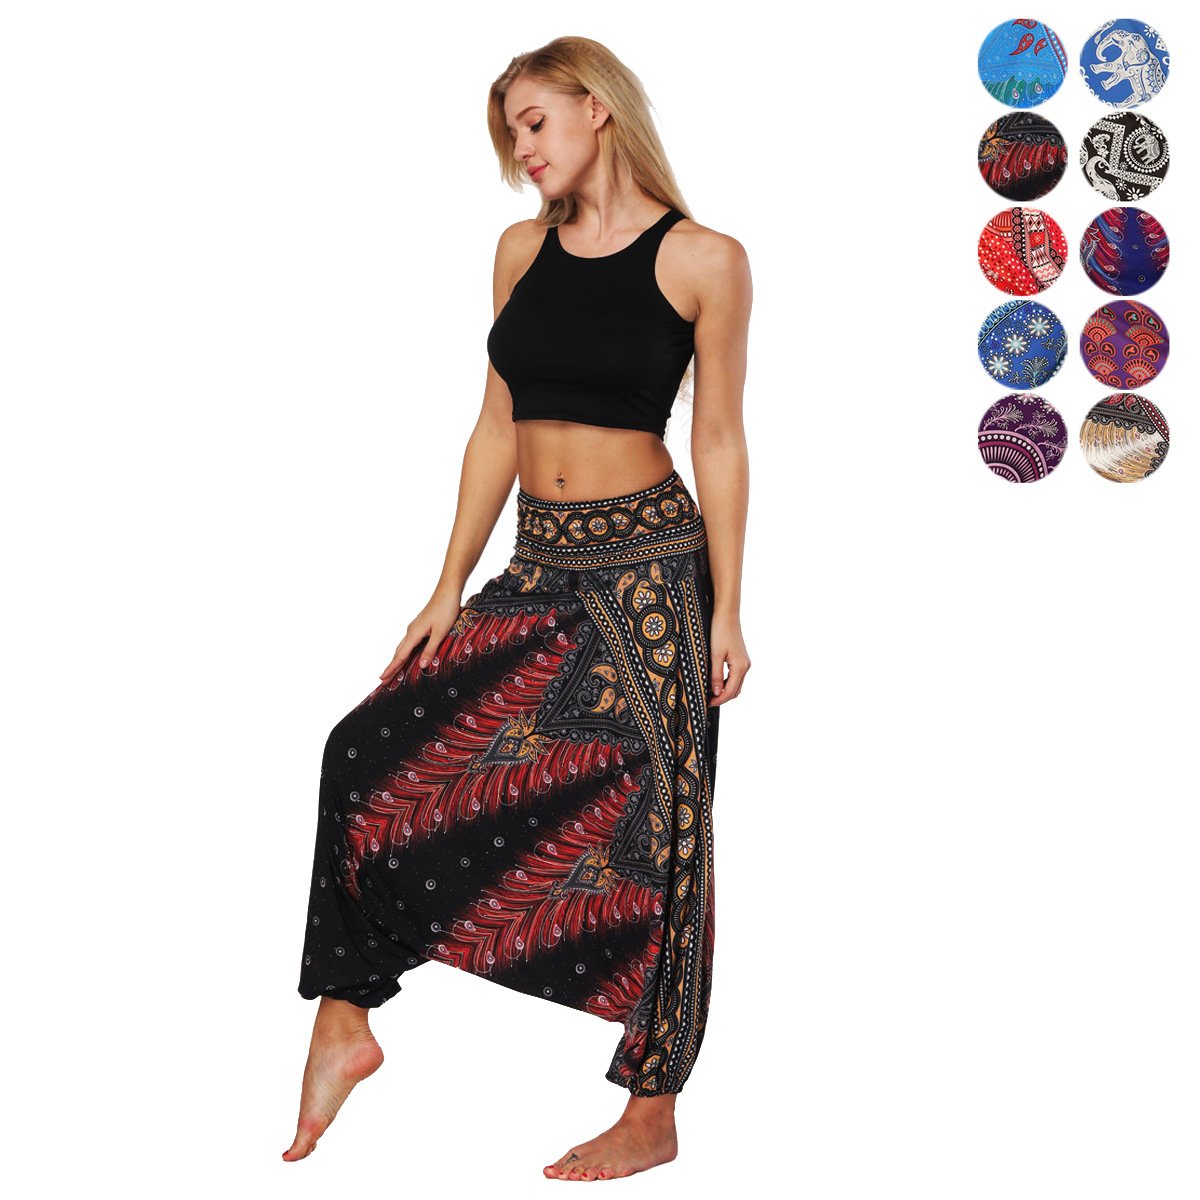 2022 European And American Women's Ethnic Style Digital Printed Bloomers Loose Fitness Yoga Pants High Waist Crotch Dance Pants